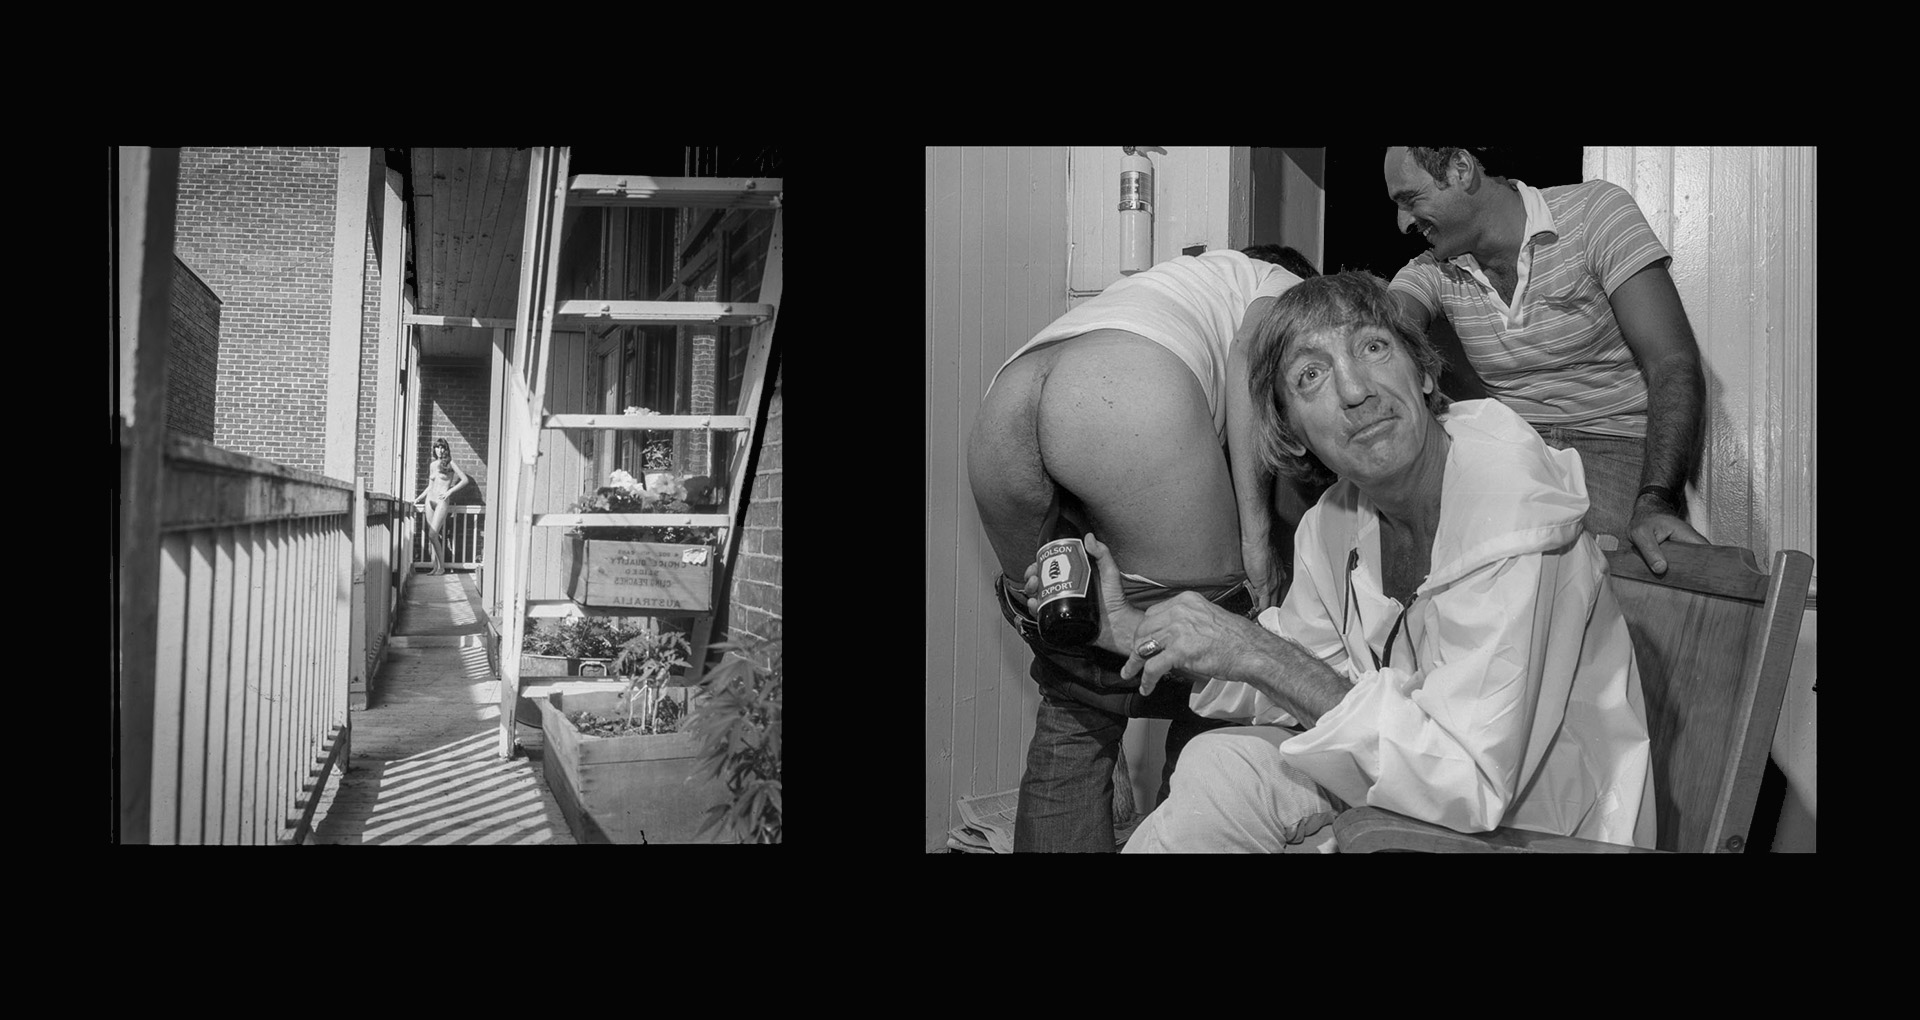 Two black and white pictures. On the left, a balcony, a naked woman at its far end. On the right, a man in the foreground puts a bottle of beer in the buttocks of a man in the background. A third man laughs behind.